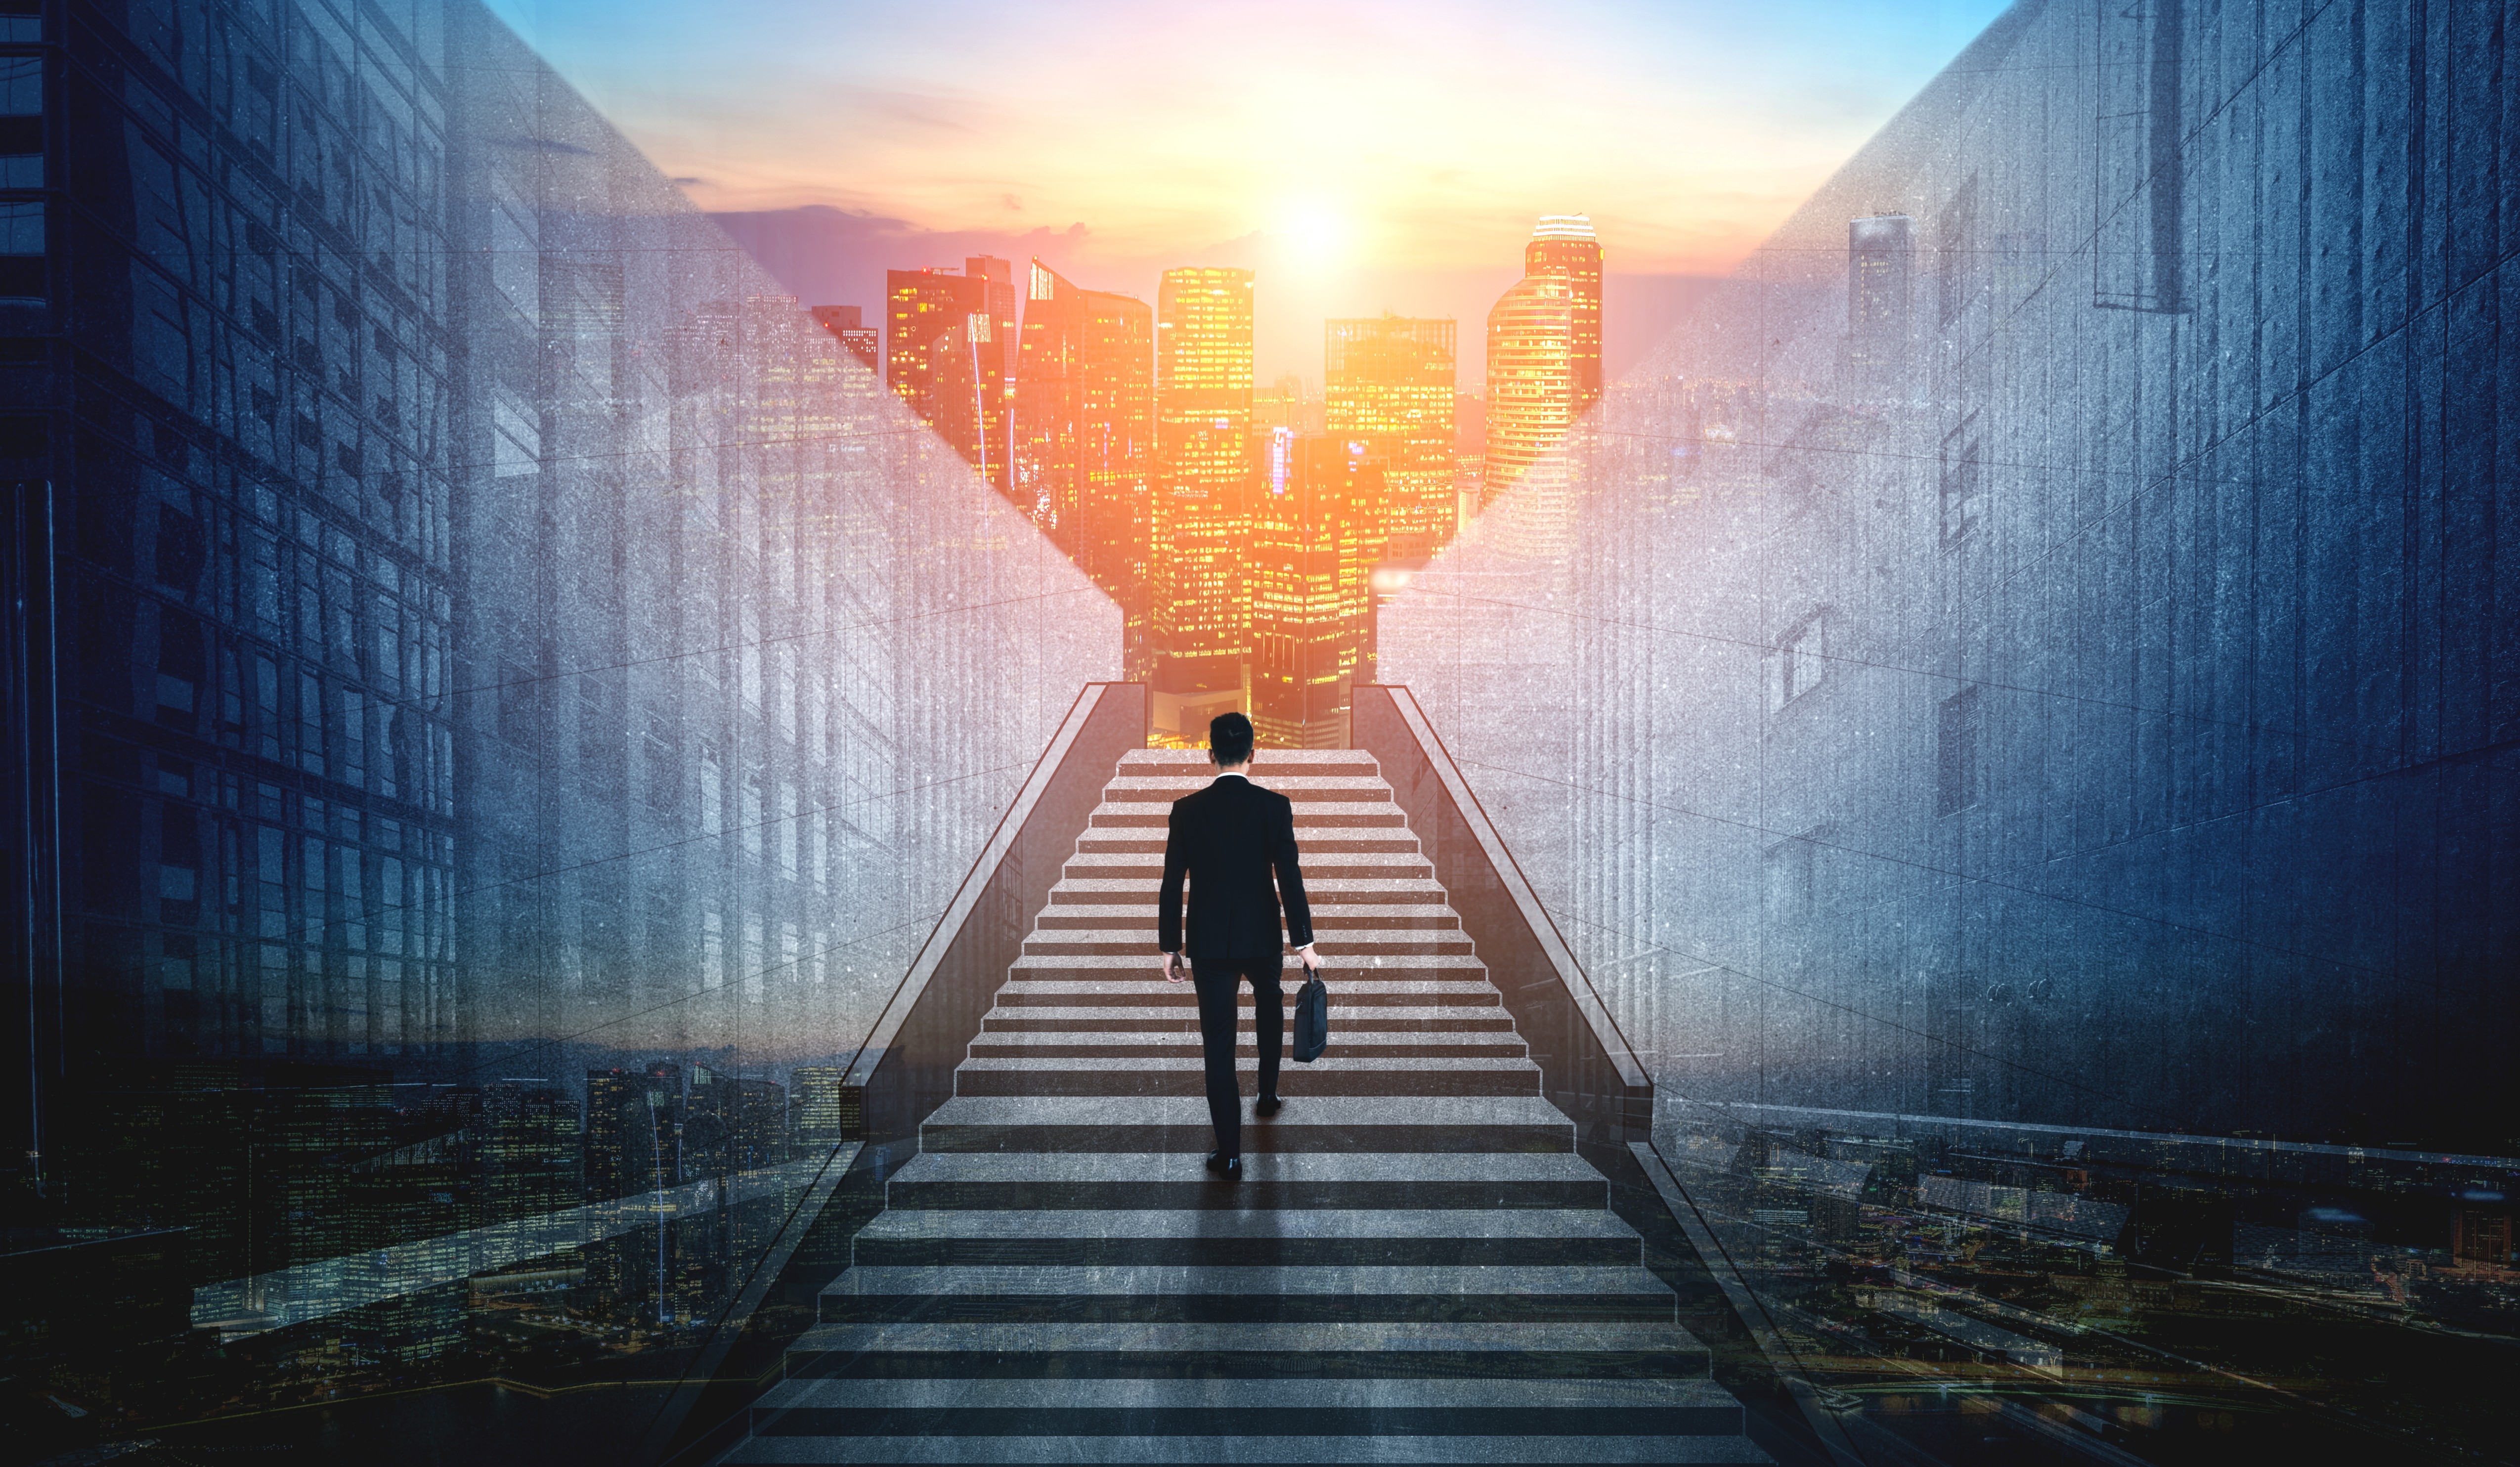 A businessman in formal attire climbing a high stairway that represents the concept of career path success, future planning, and business competition. The image depicts the businessman's ambition to overcome challenges and pursue opportunities for success